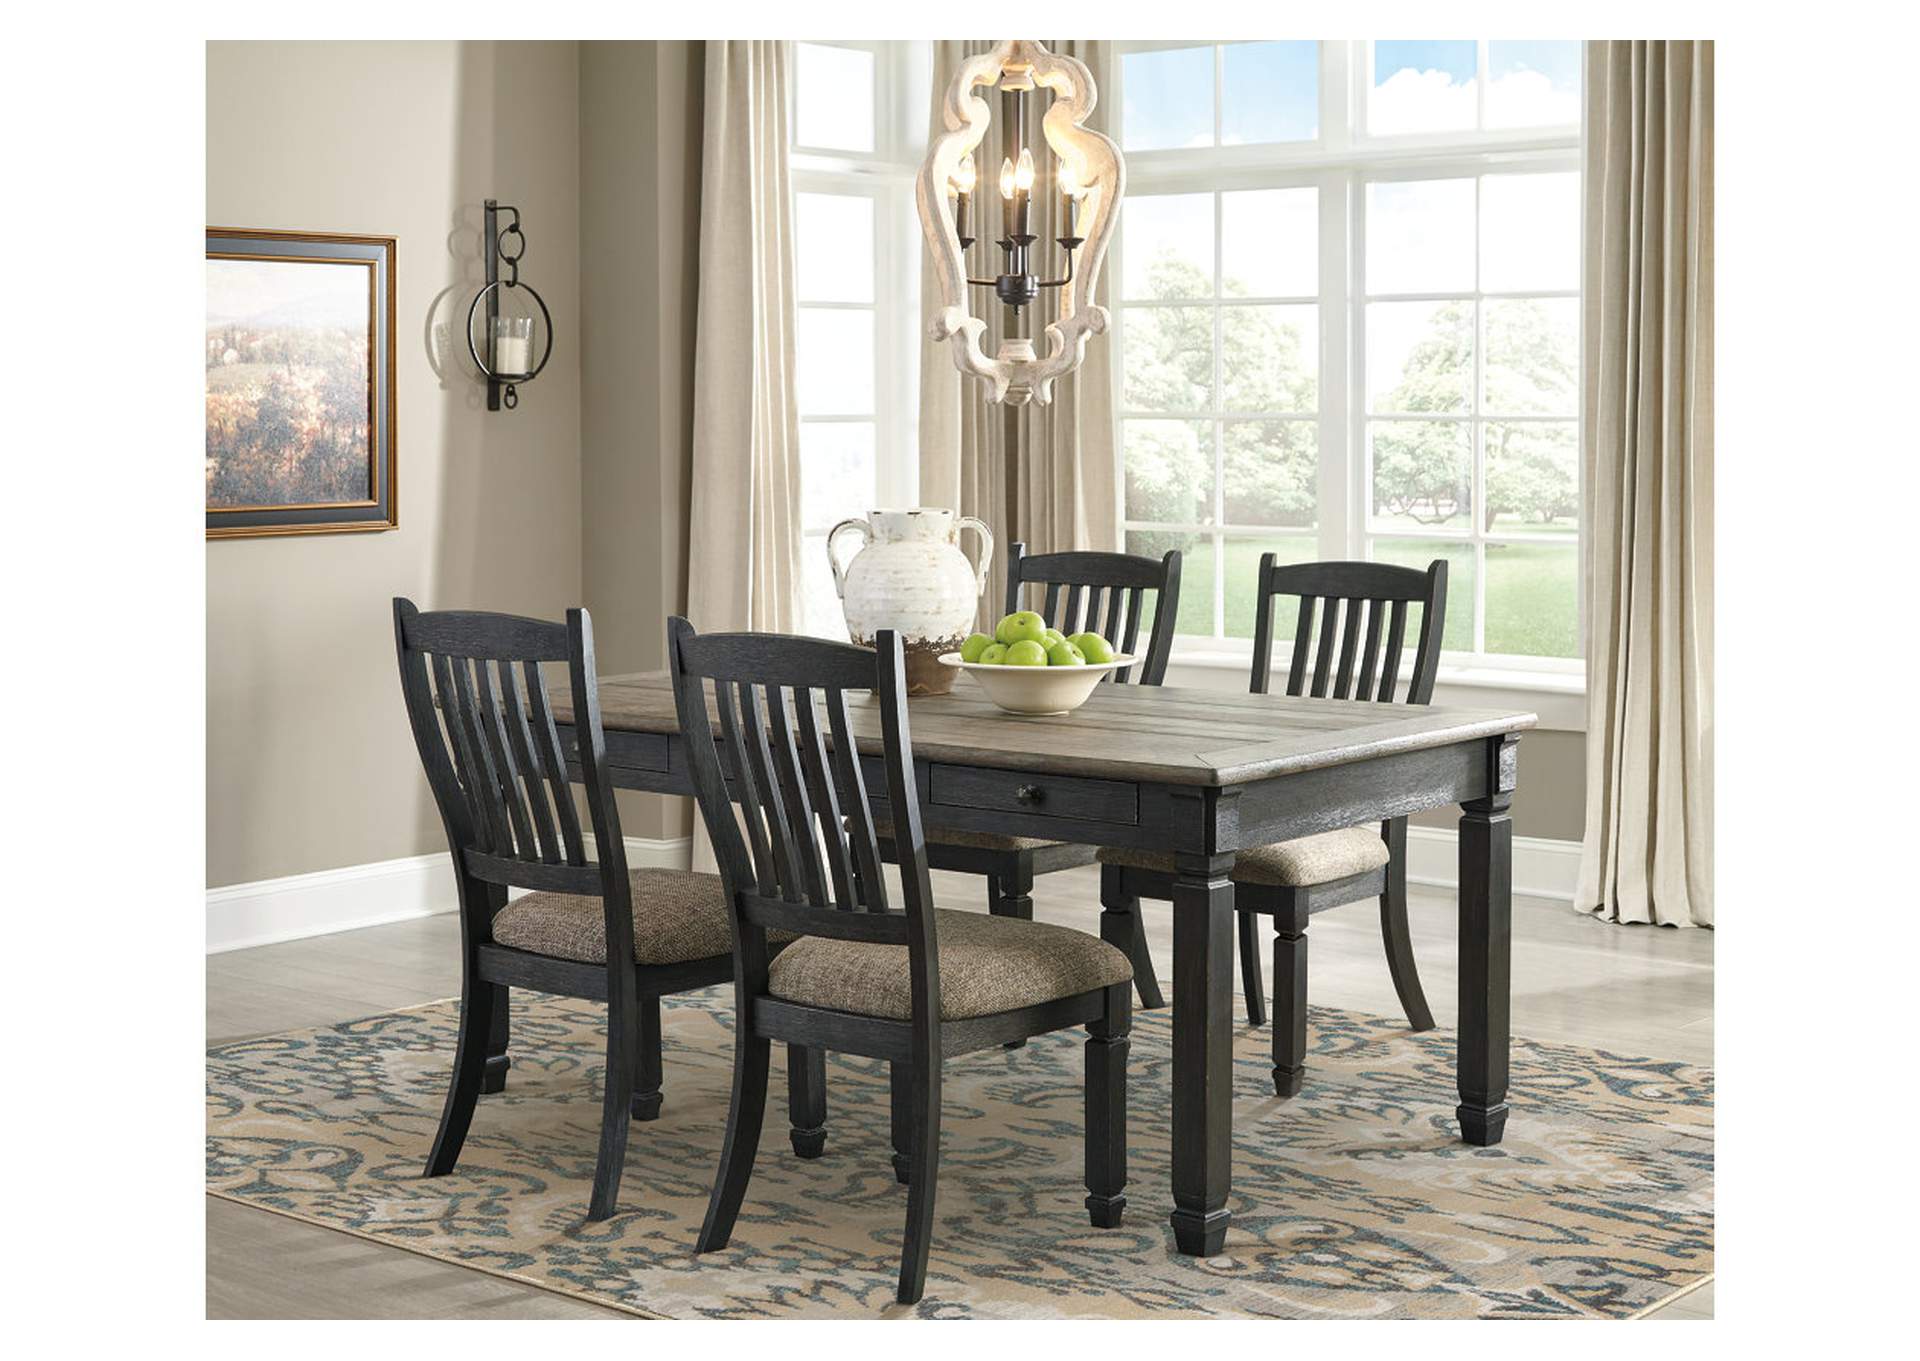 Tyler Creek Dining Table and 4 Chairs,Signature Design By Ashley